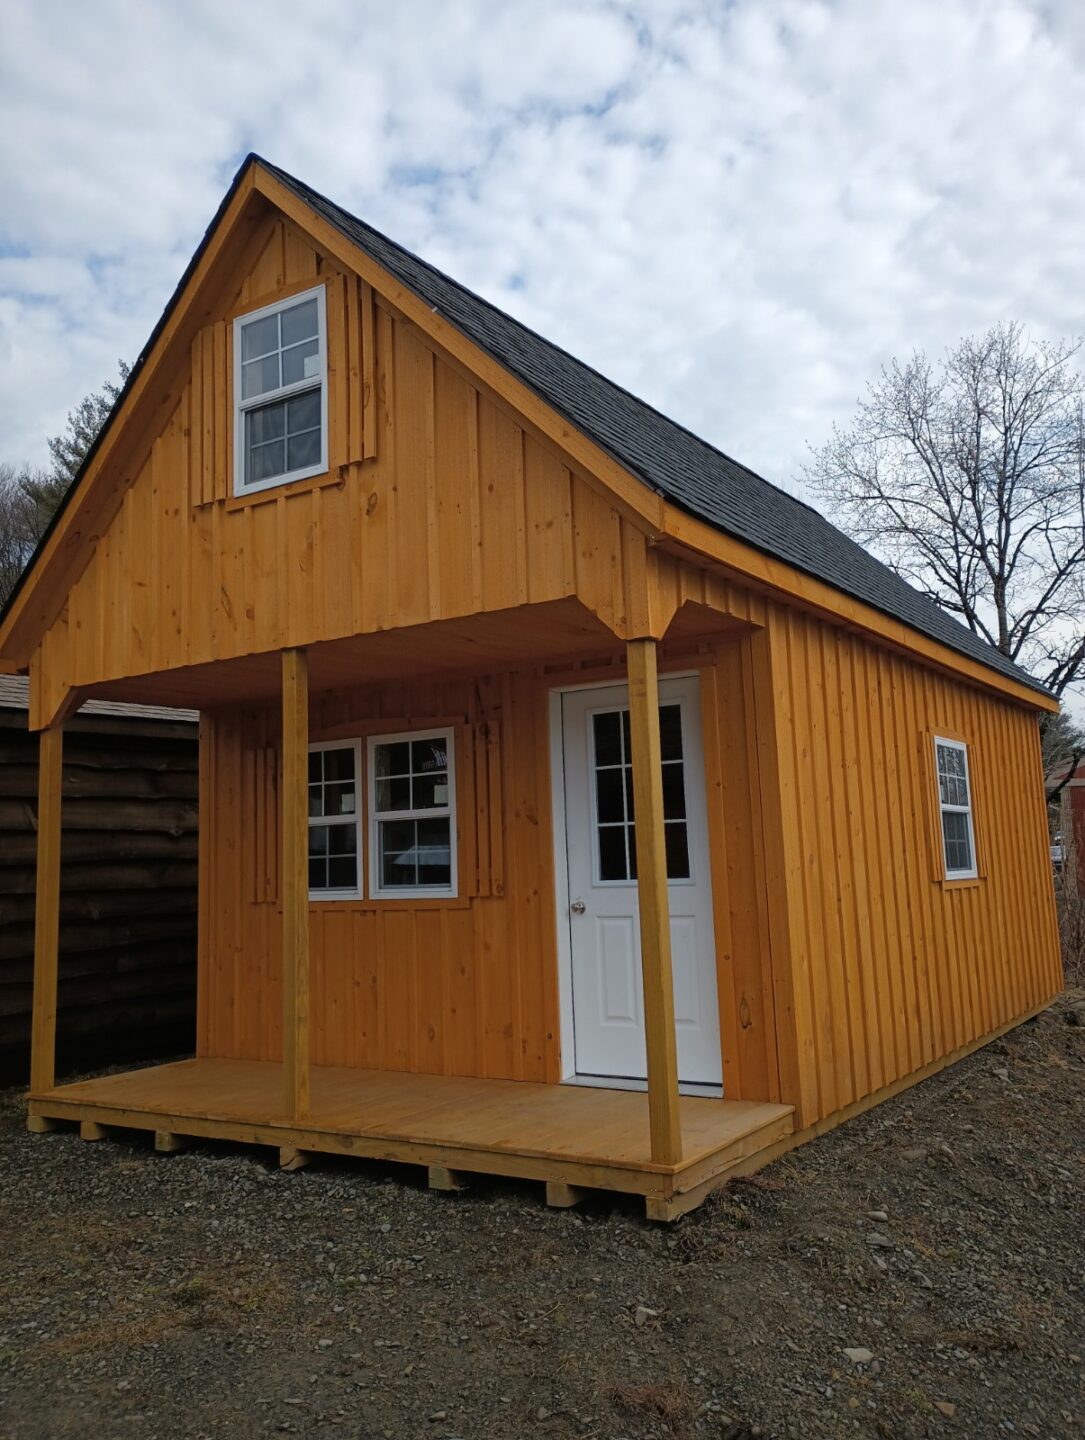 12/12 Pitch Board & Batten Shed with Porch